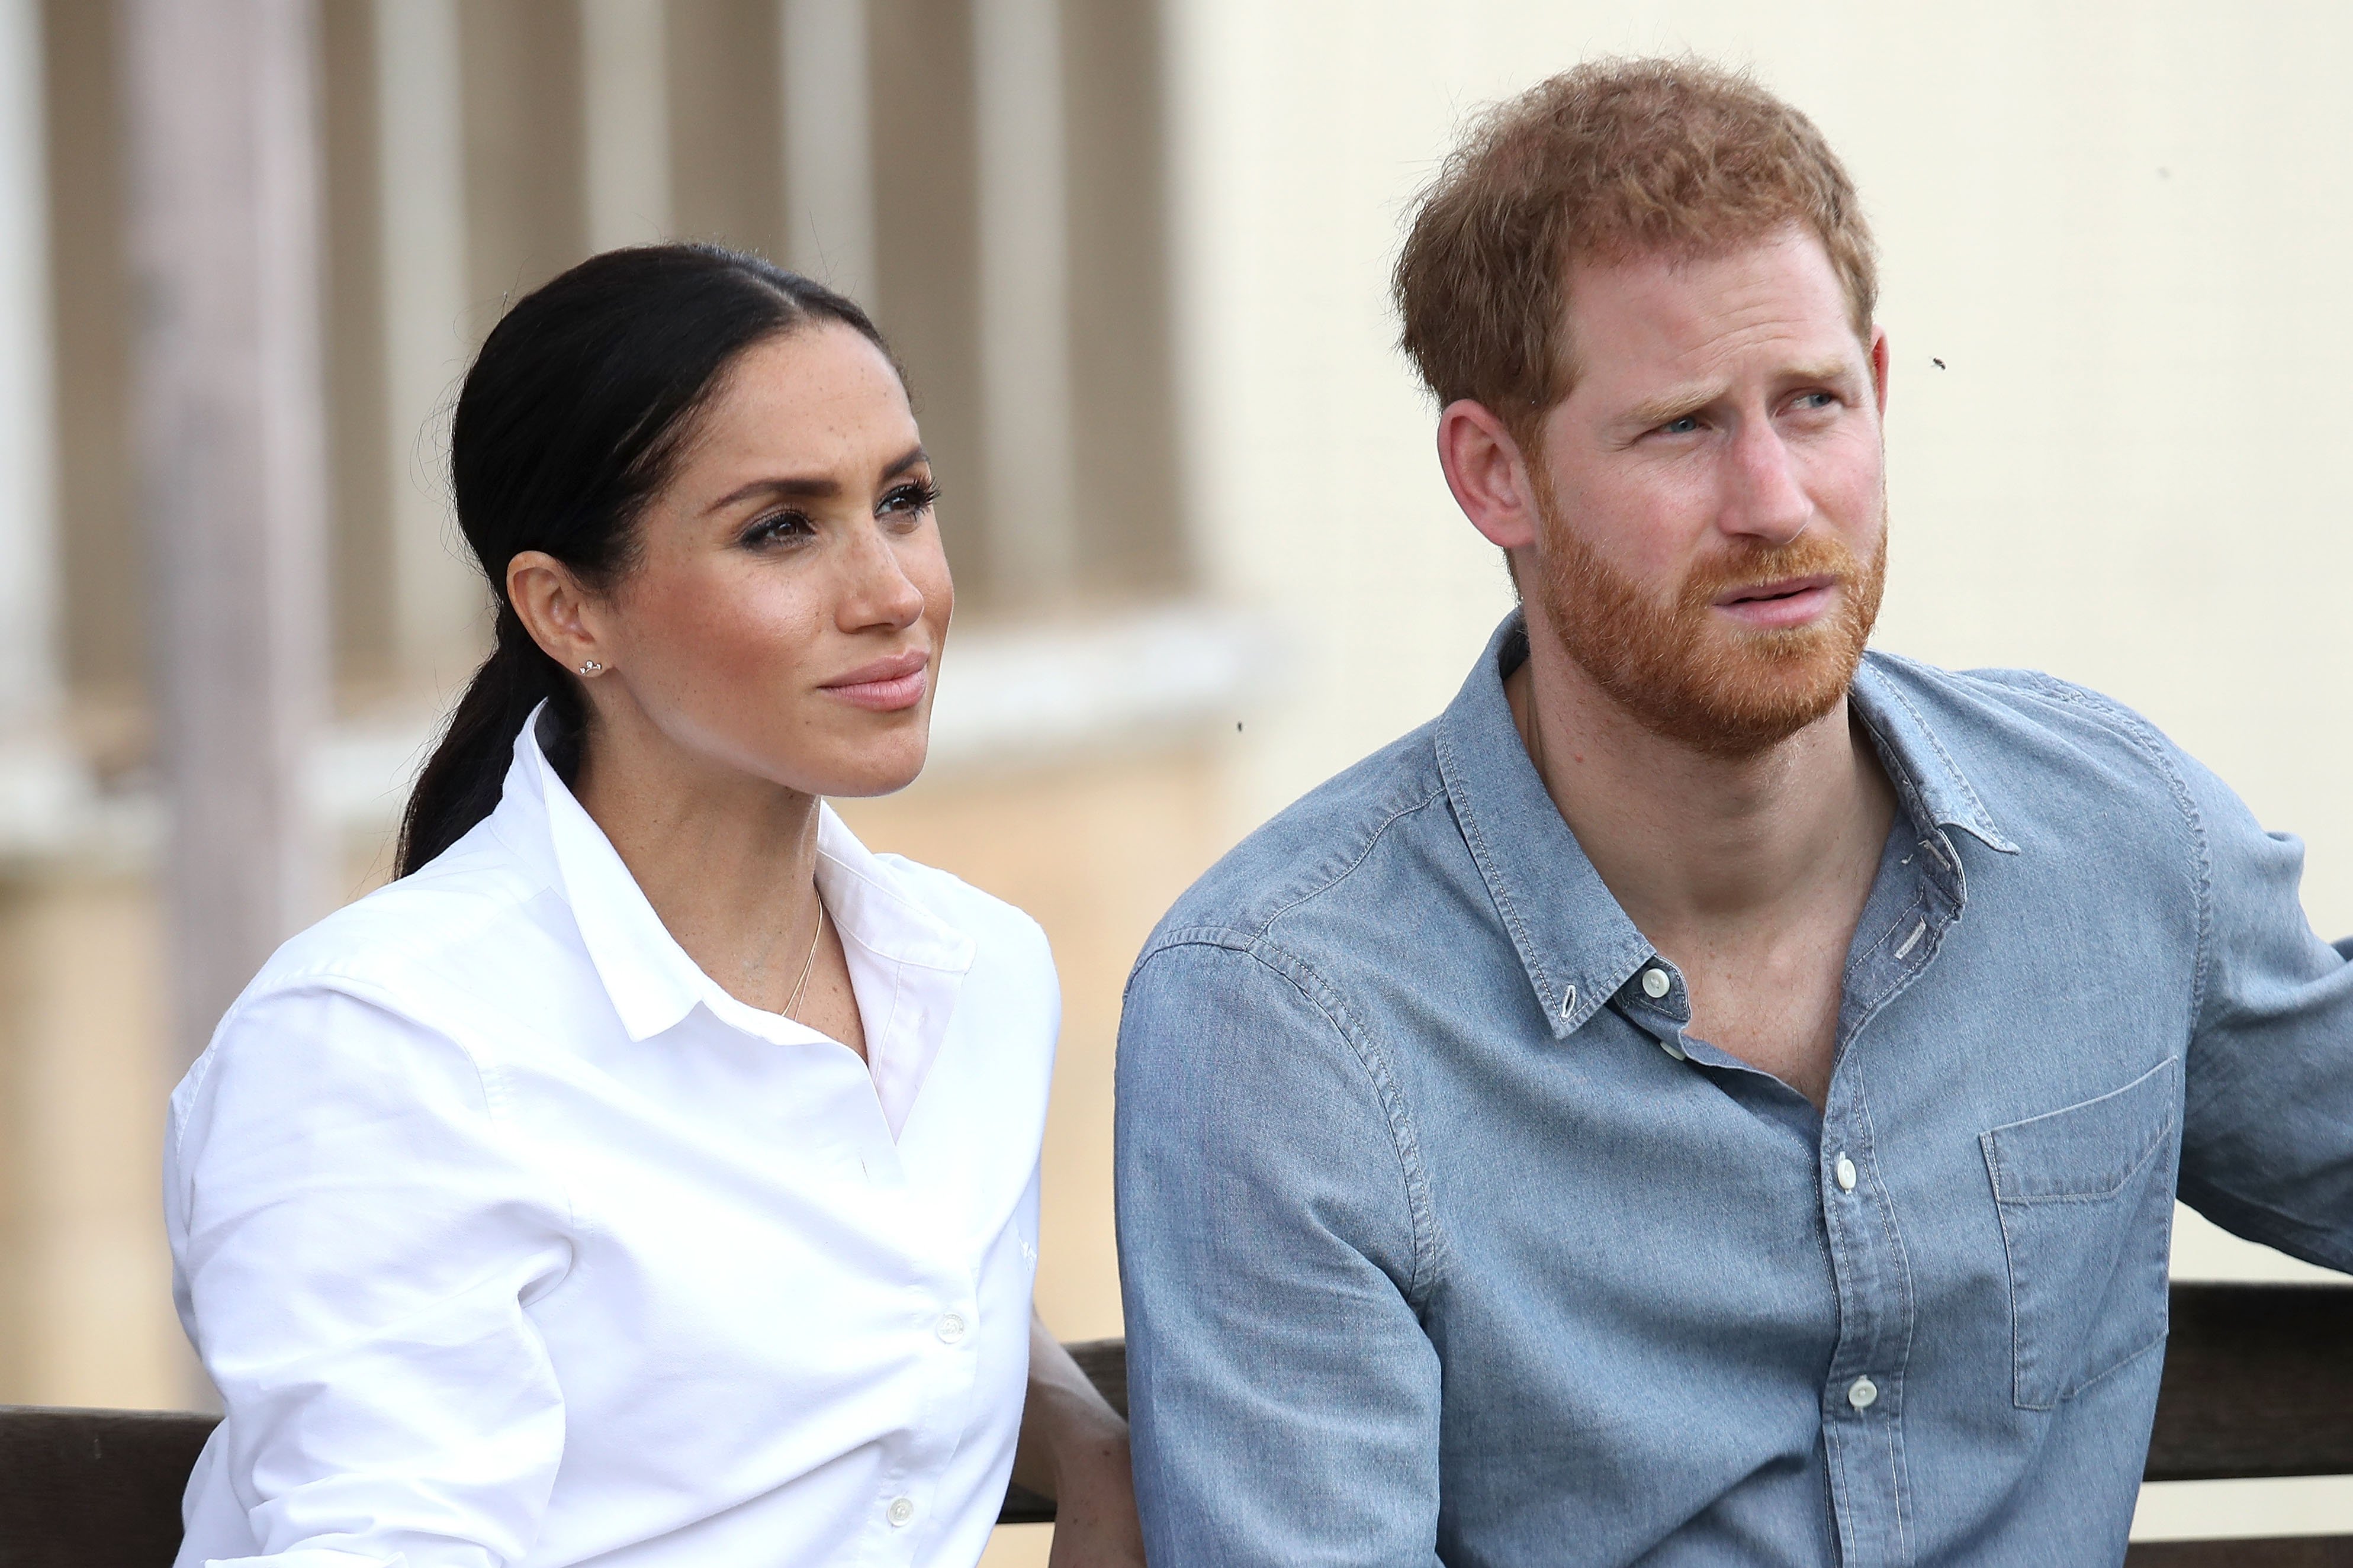 Prince Harry and Meghan Markle in Australia 2018. | Source: Getty Images